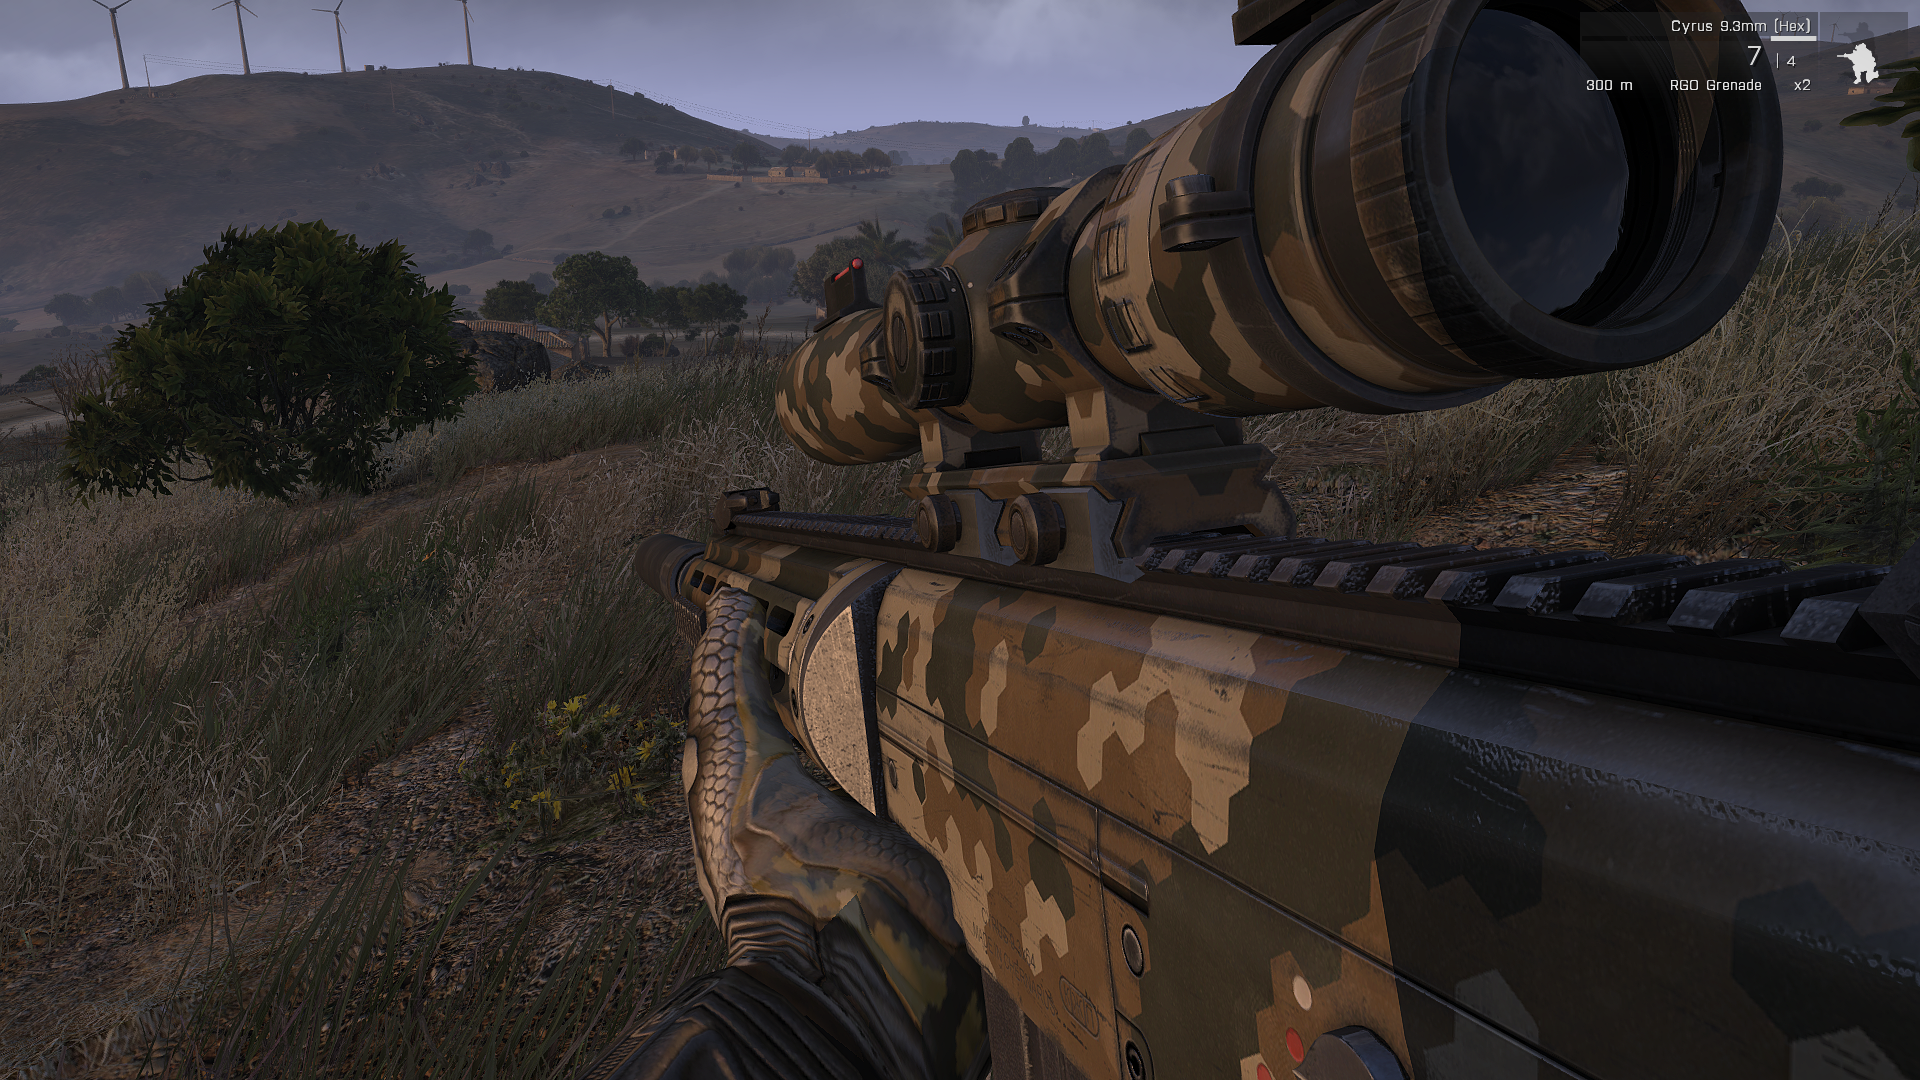 SNIPER PACKAGE SNEAKS INTO THE ARMA 3 ALPHA, News, Arma 3